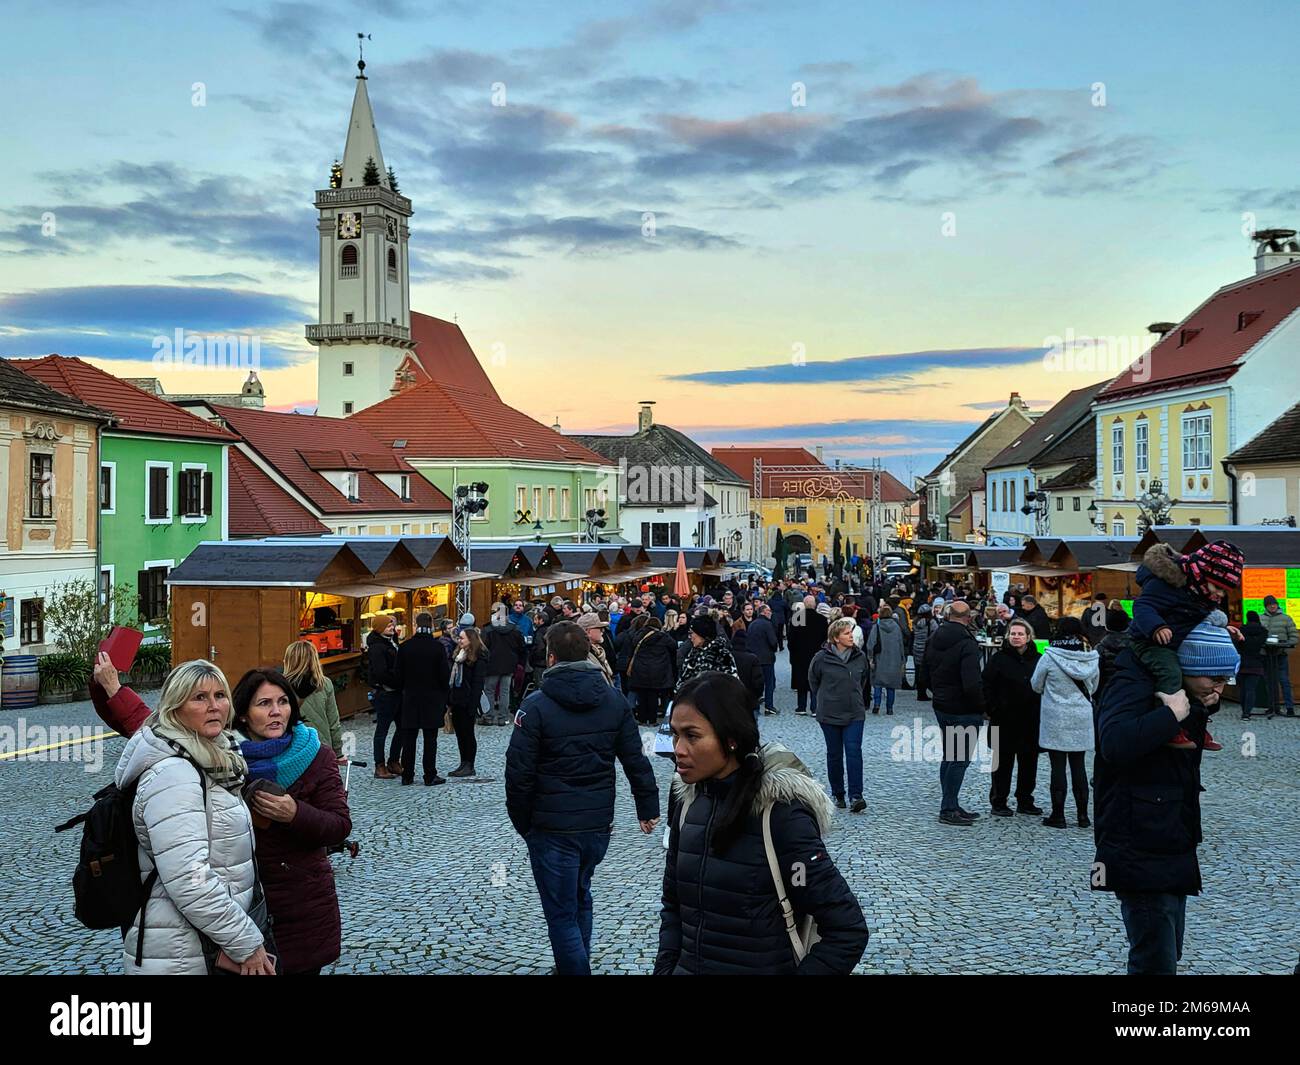 Rust, Austria - November 26, 2022: Unidentified people and evening atmosphere at the traditional Christmas market in the stork city in Burgenland Stock Photo